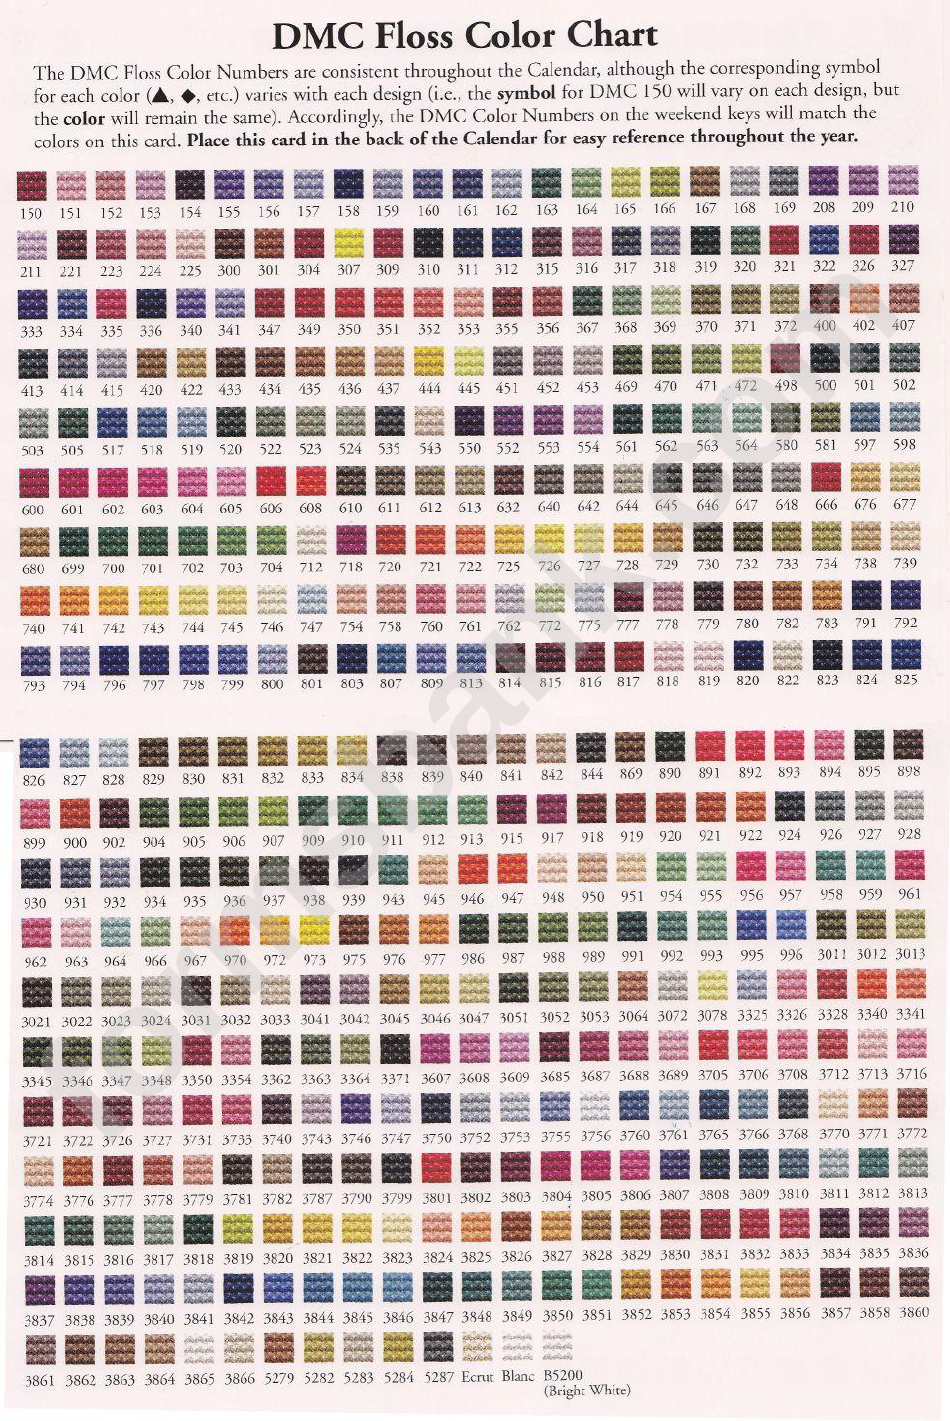 dmc floss color chart printable That are Revered Jacobs Blog